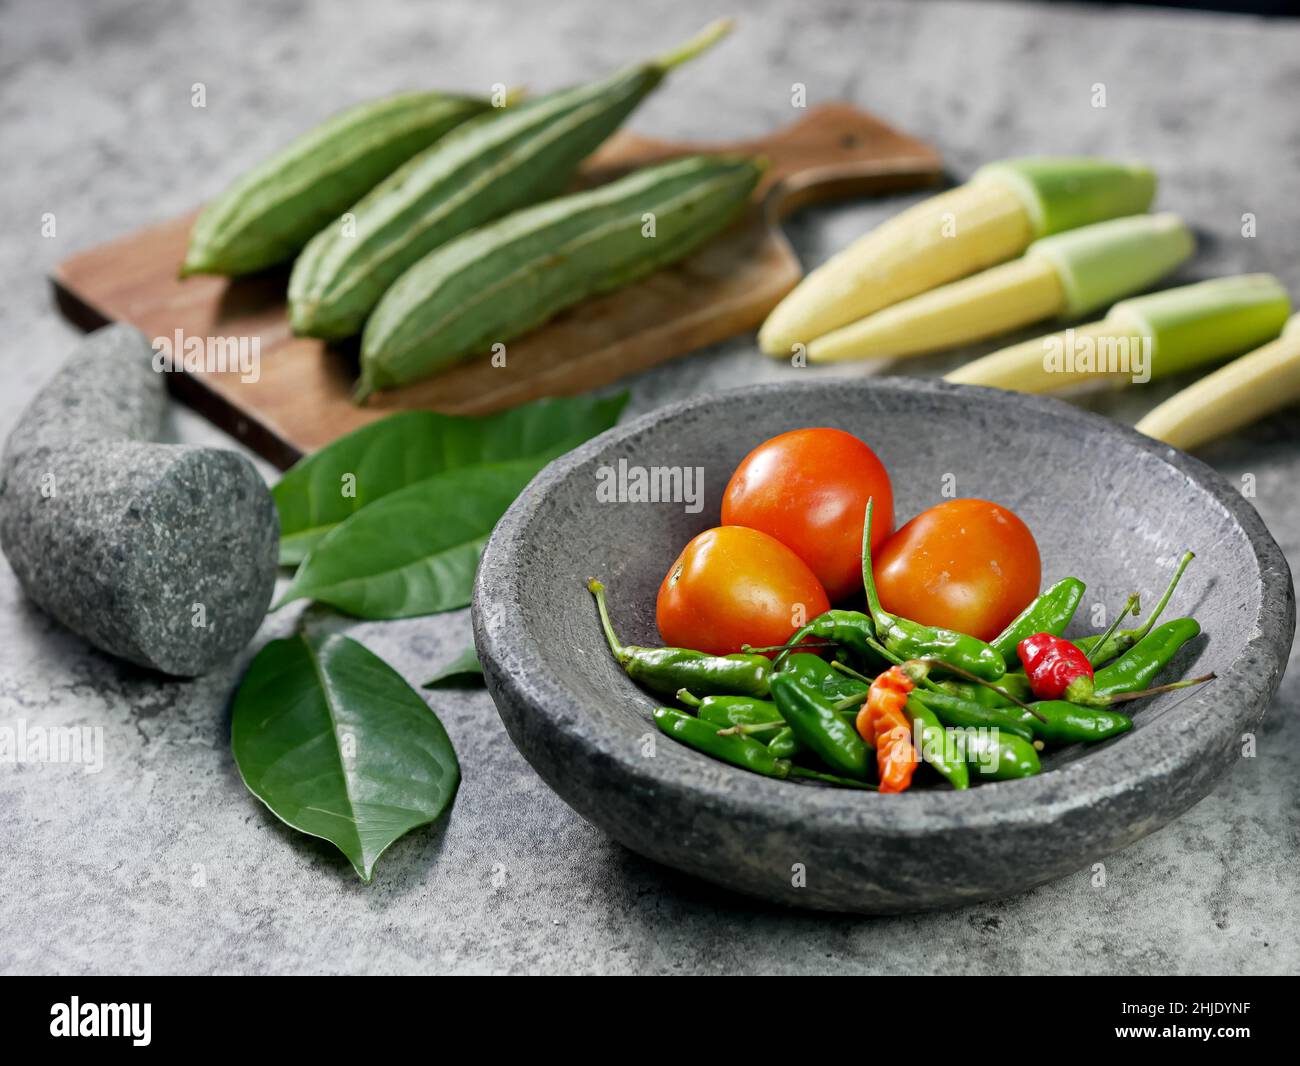 chilies and tomatoes in a mortar, recipe for vegetable baby corn and luffa acutangula with tomato sauce. food preparation concept. Stock Photo